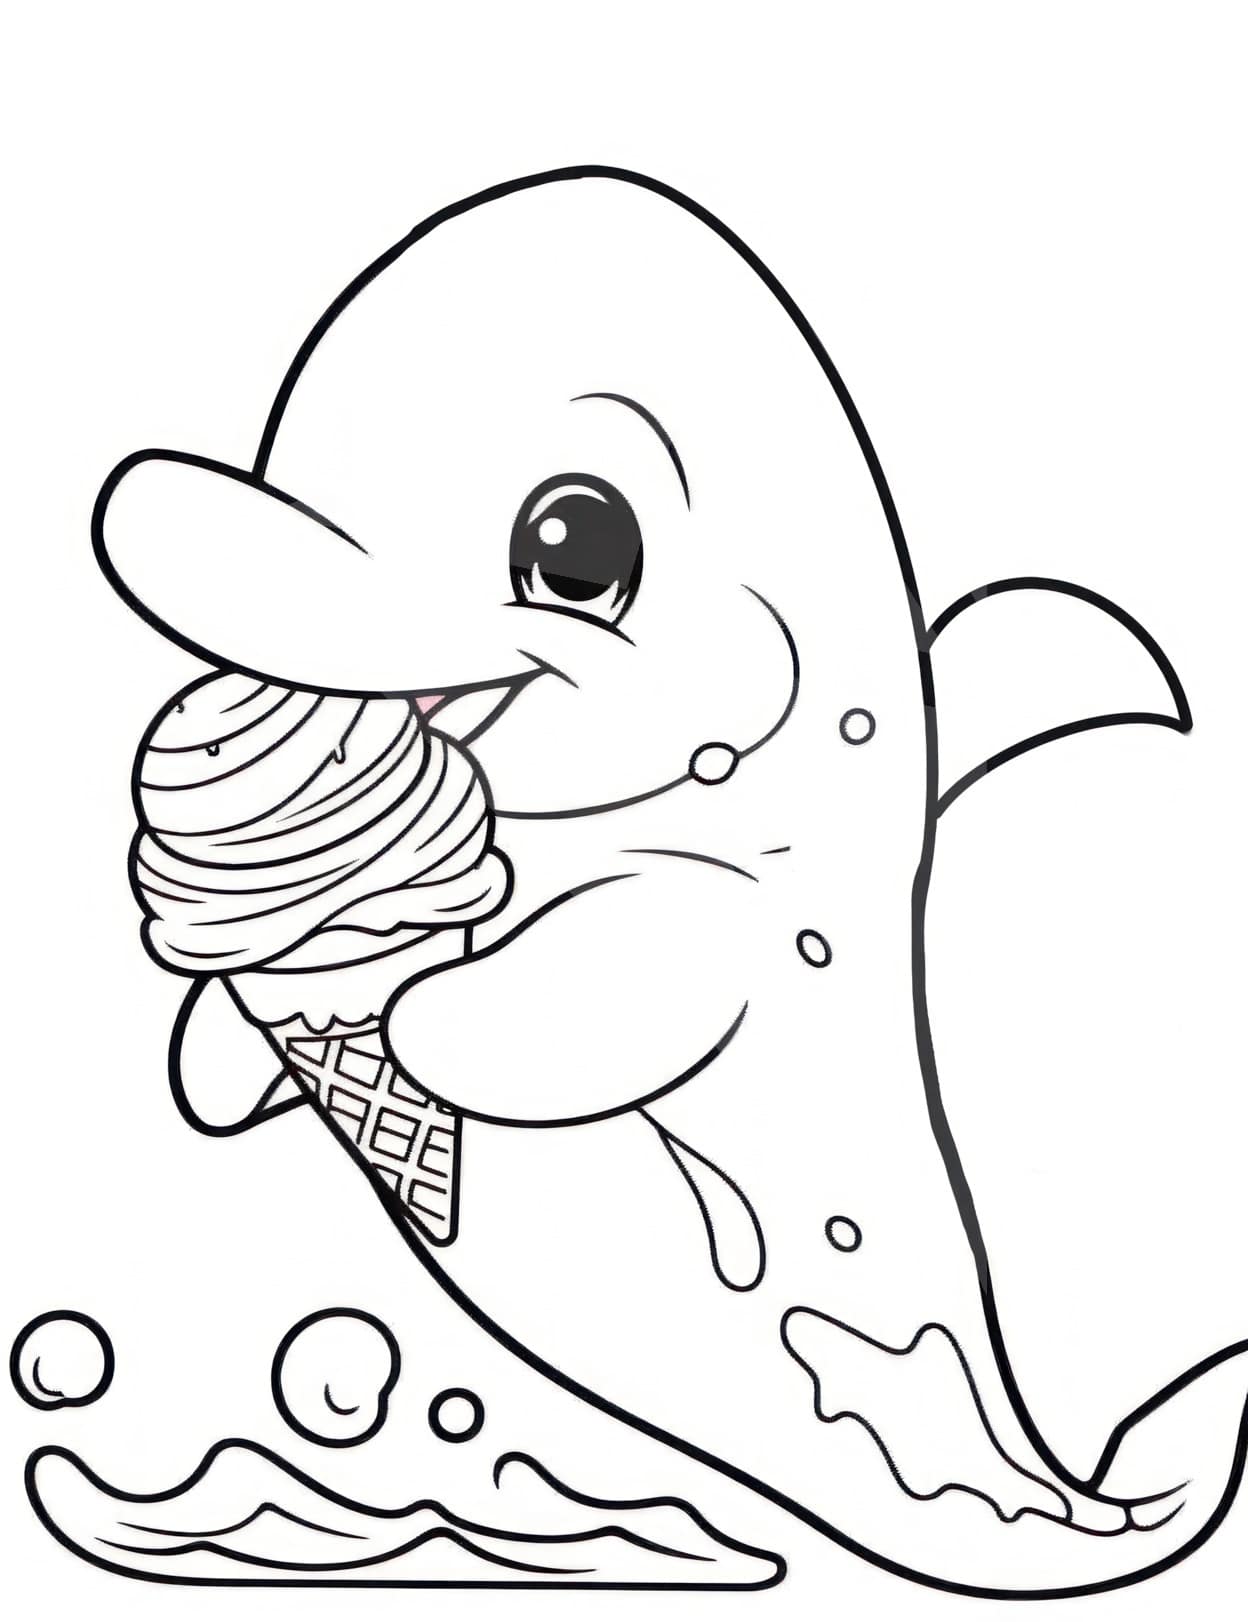 Dolphin coloring pages for kids and adults